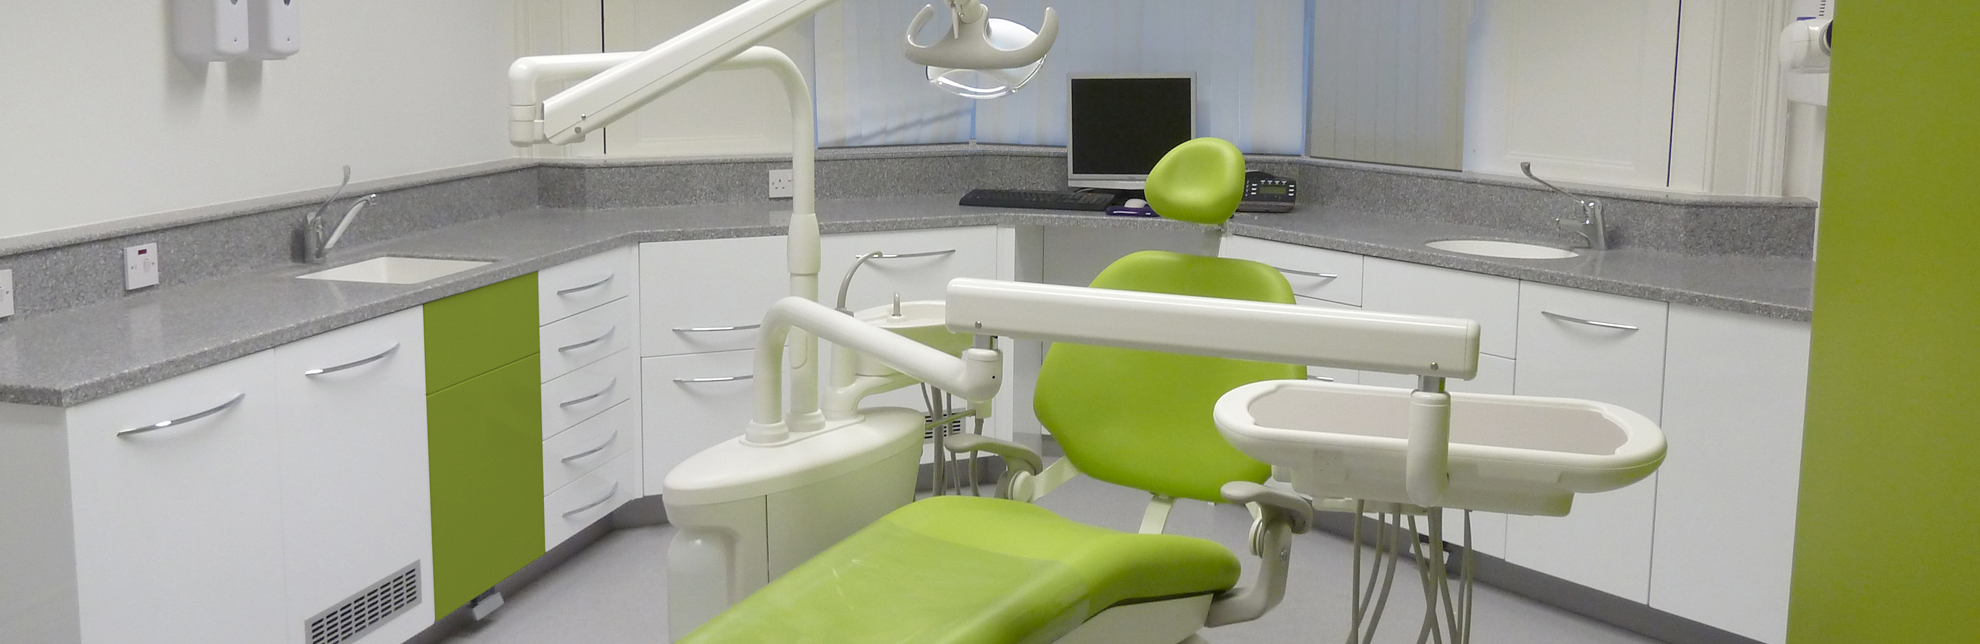 Dental surgery refits and new equipment installations 